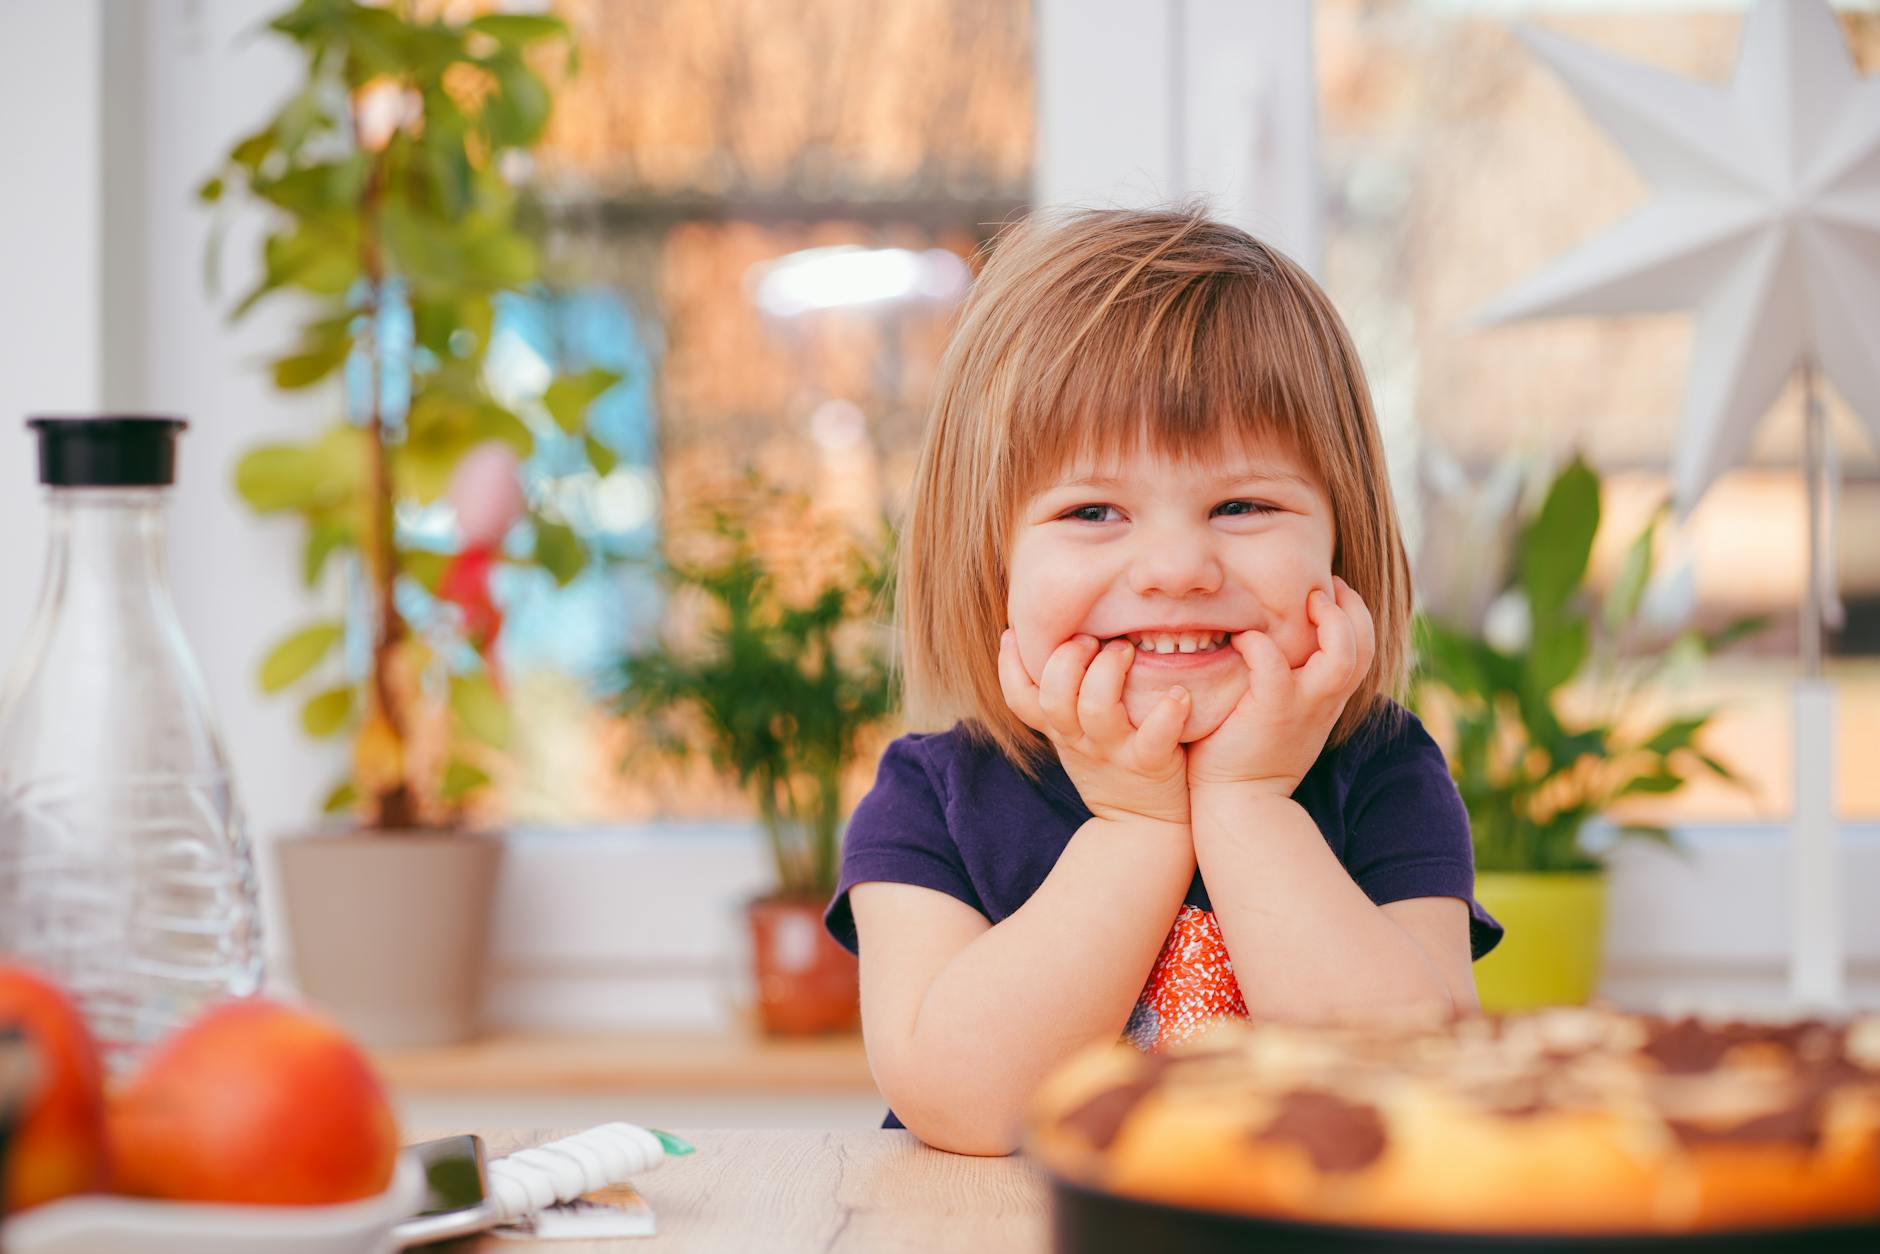 Effective Strategies for Managing Picky Eating in Children | Pediatric Insights